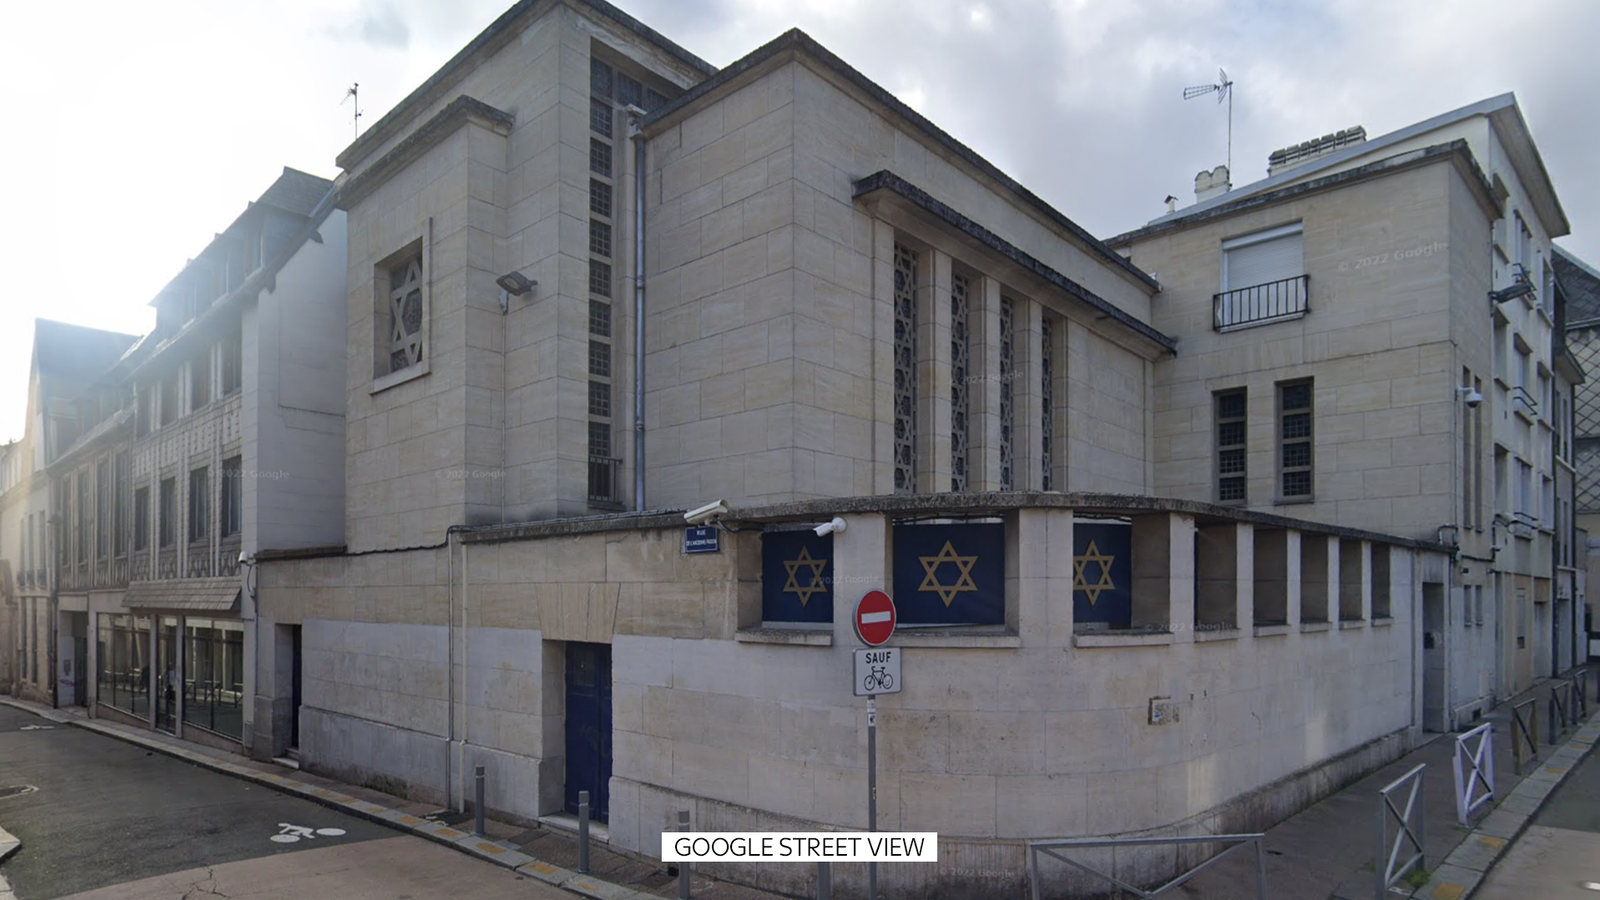 French police shoot dead armed suspect who 'planned to set fire to synagogue'